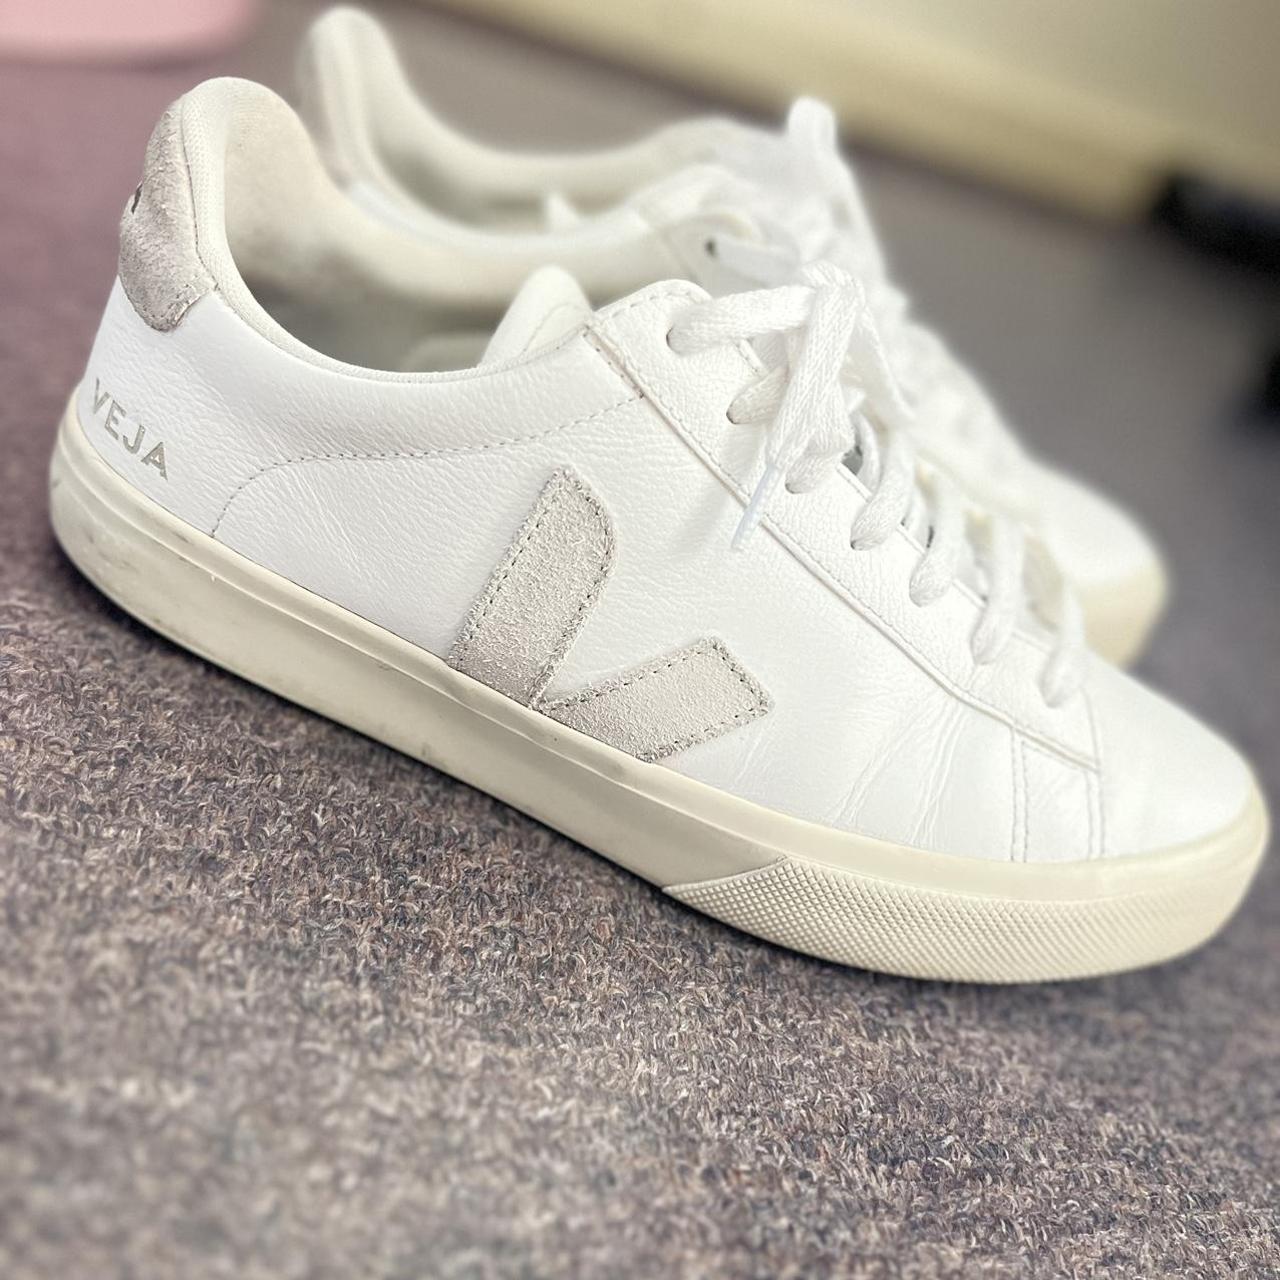 Veja Women's White and Cream Trainers | Depop